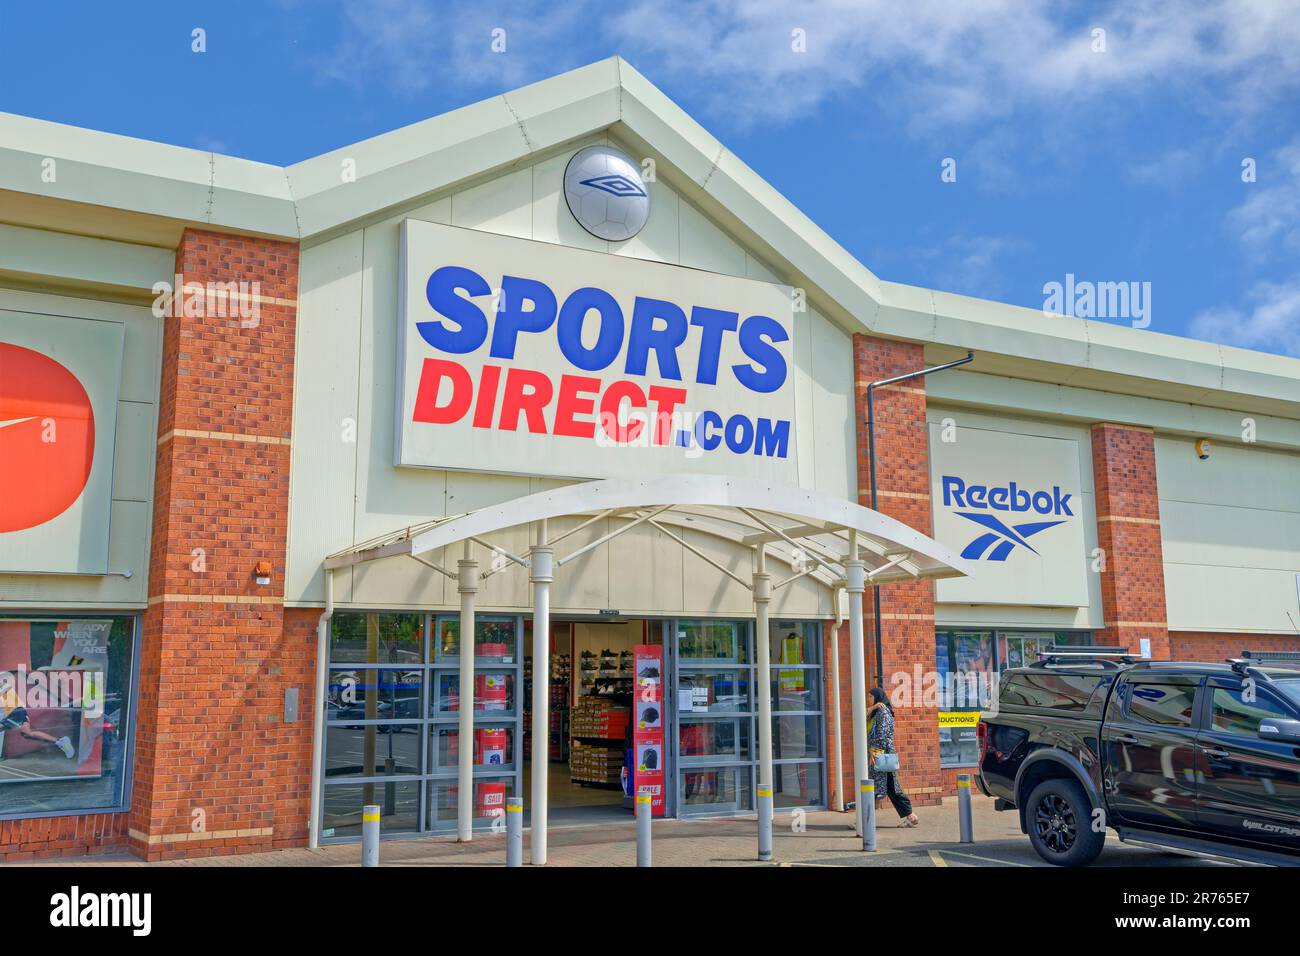 Sports Direct.com retail outlet in Warrington, Cheshire. Stock Photo